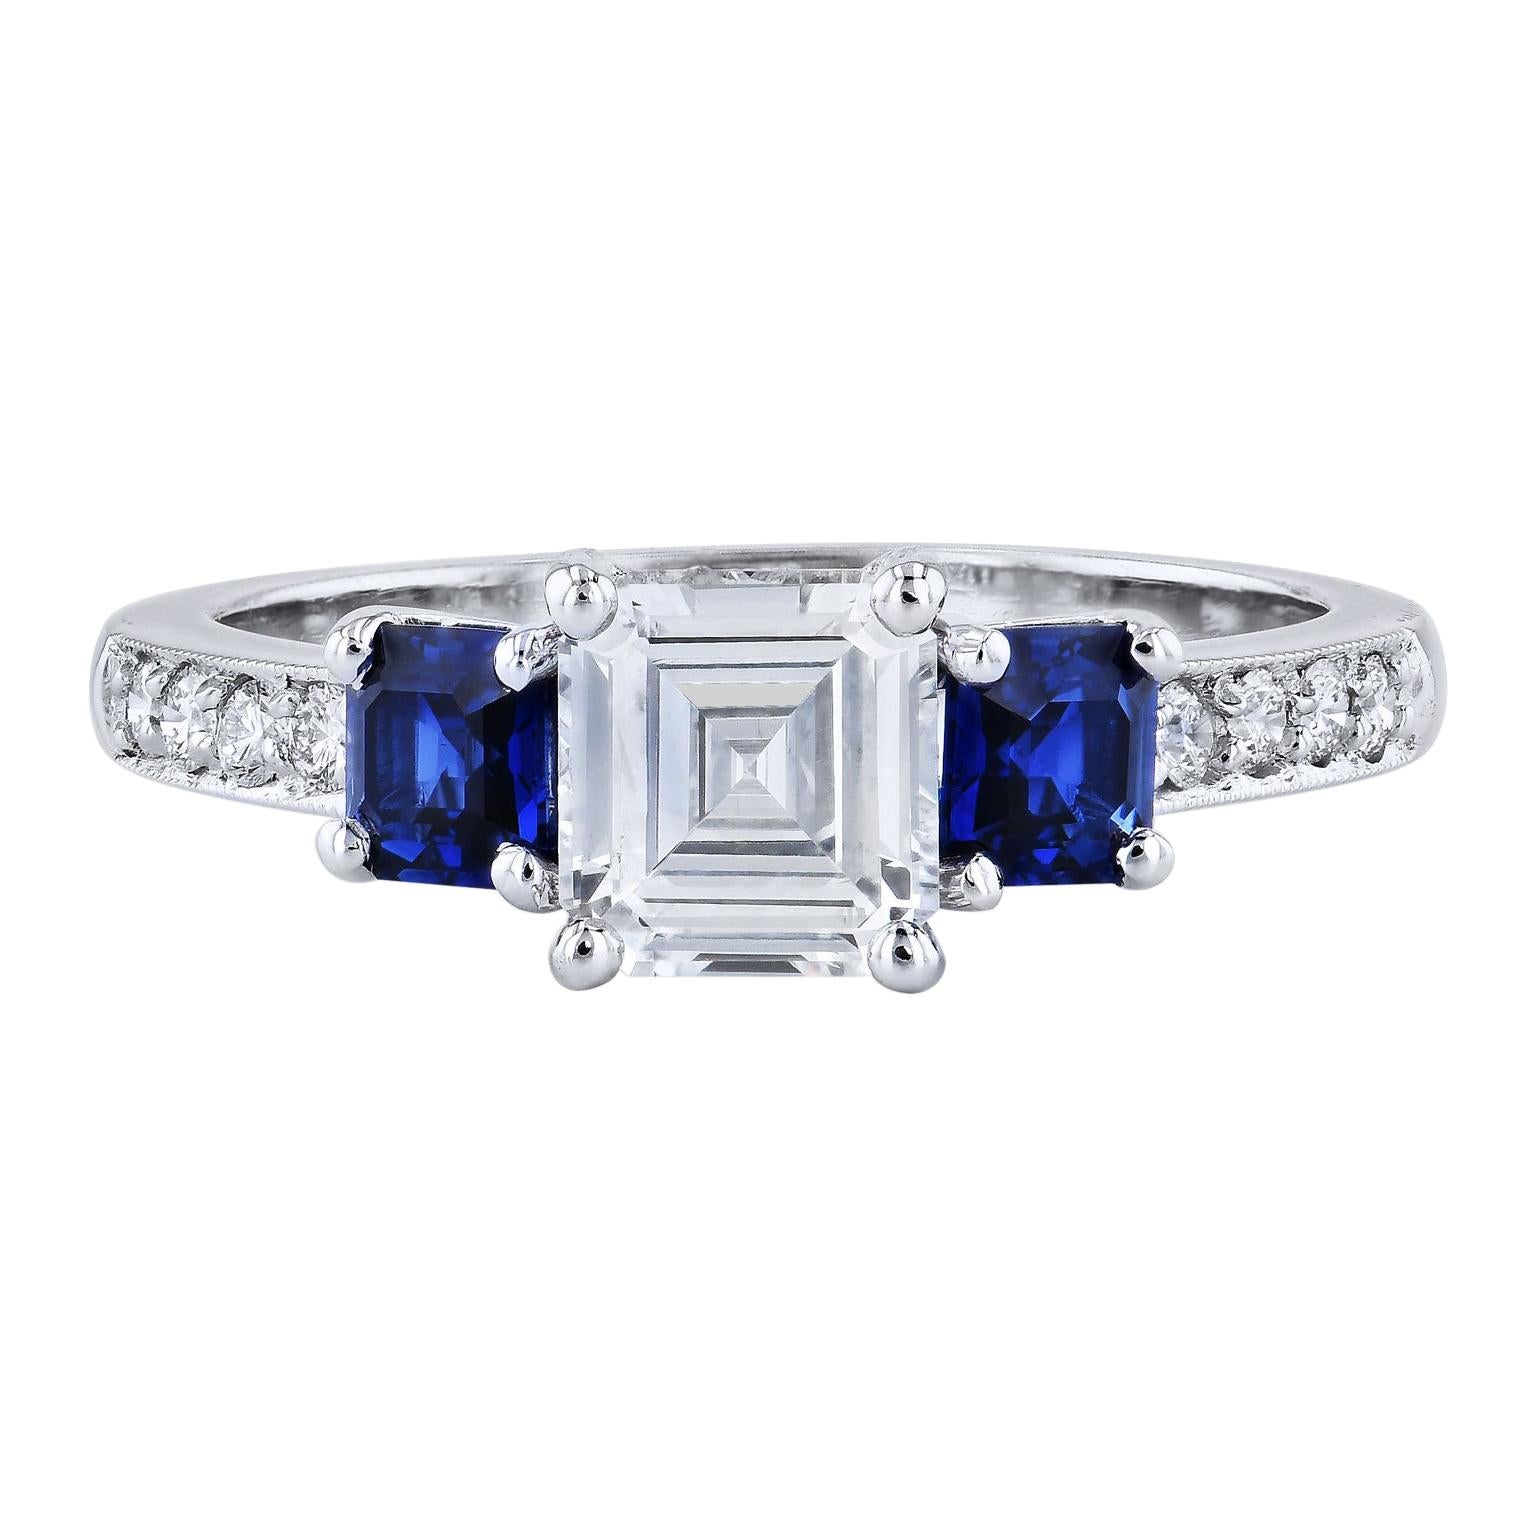 H&H GIA Cert 1.02 Carat Square Emerald Cut Diamond Ring 2 Assher Blue Sapphires For Sale